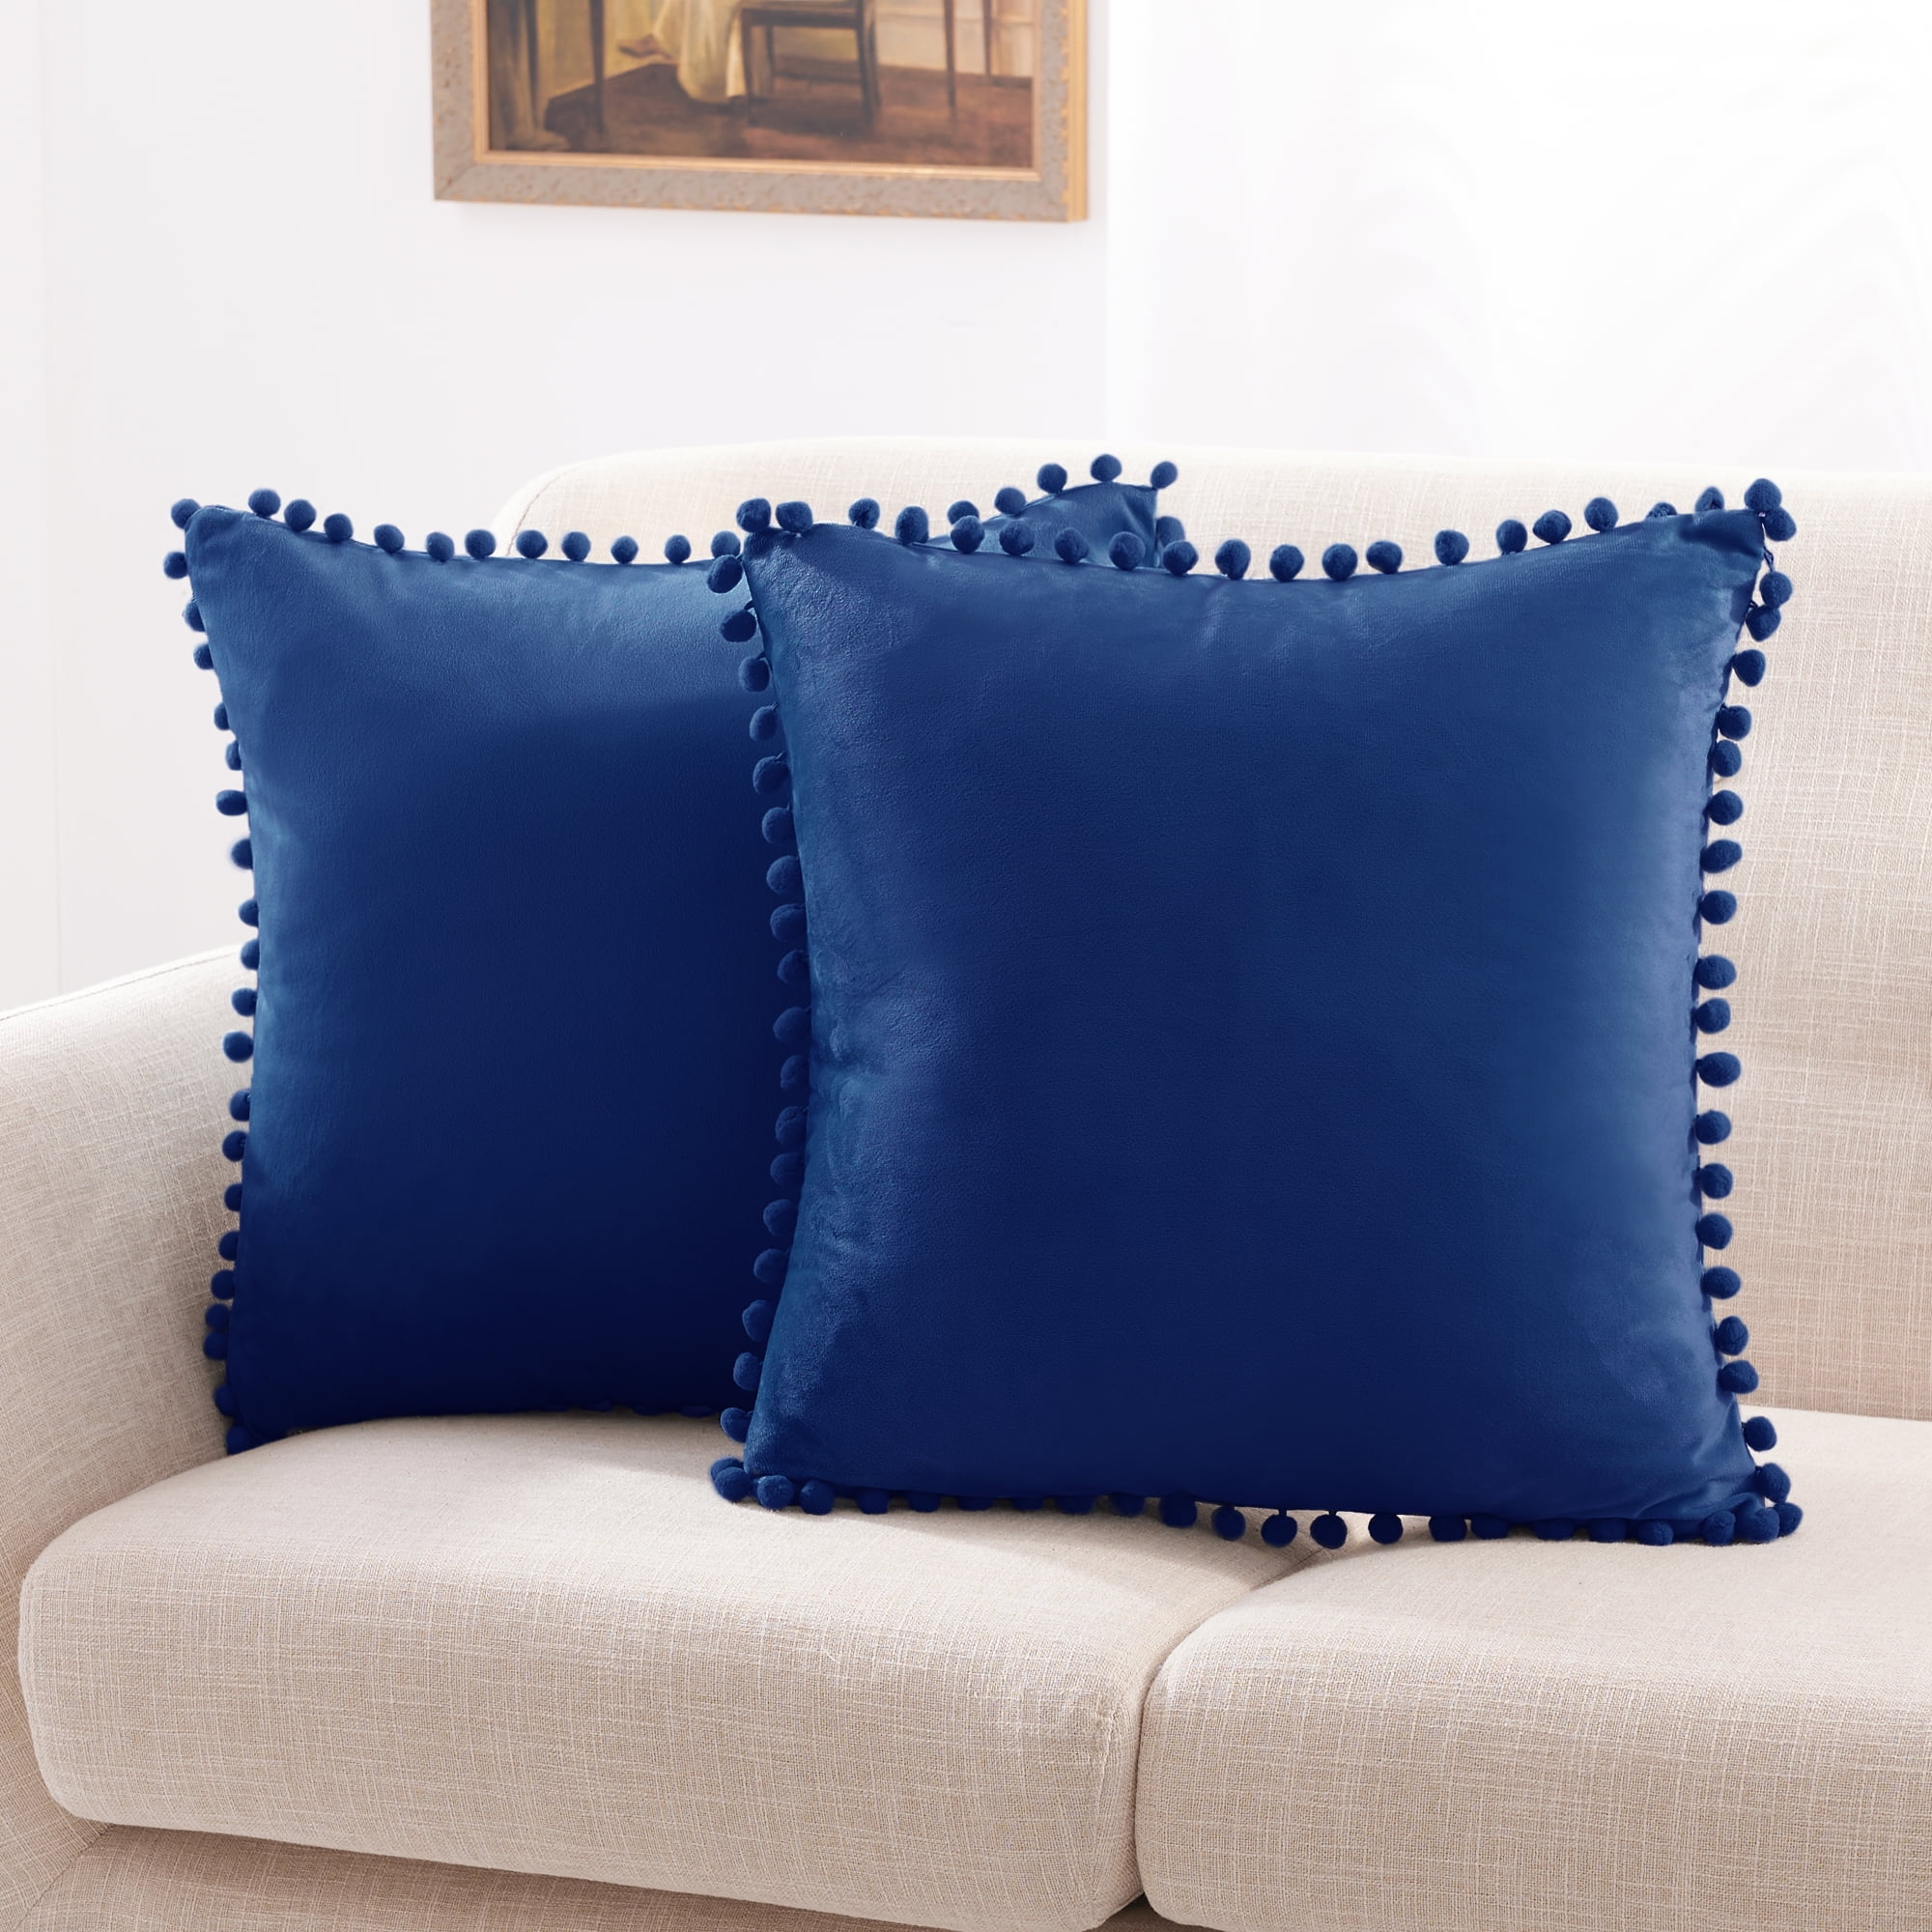 Deconovo Large Sofa Pillow Covers 24x24 Set Square Velvet Decorative Throw  Pillow Covers for Beds, Sofa, 24x 24, Navy Blue, 2 Pack